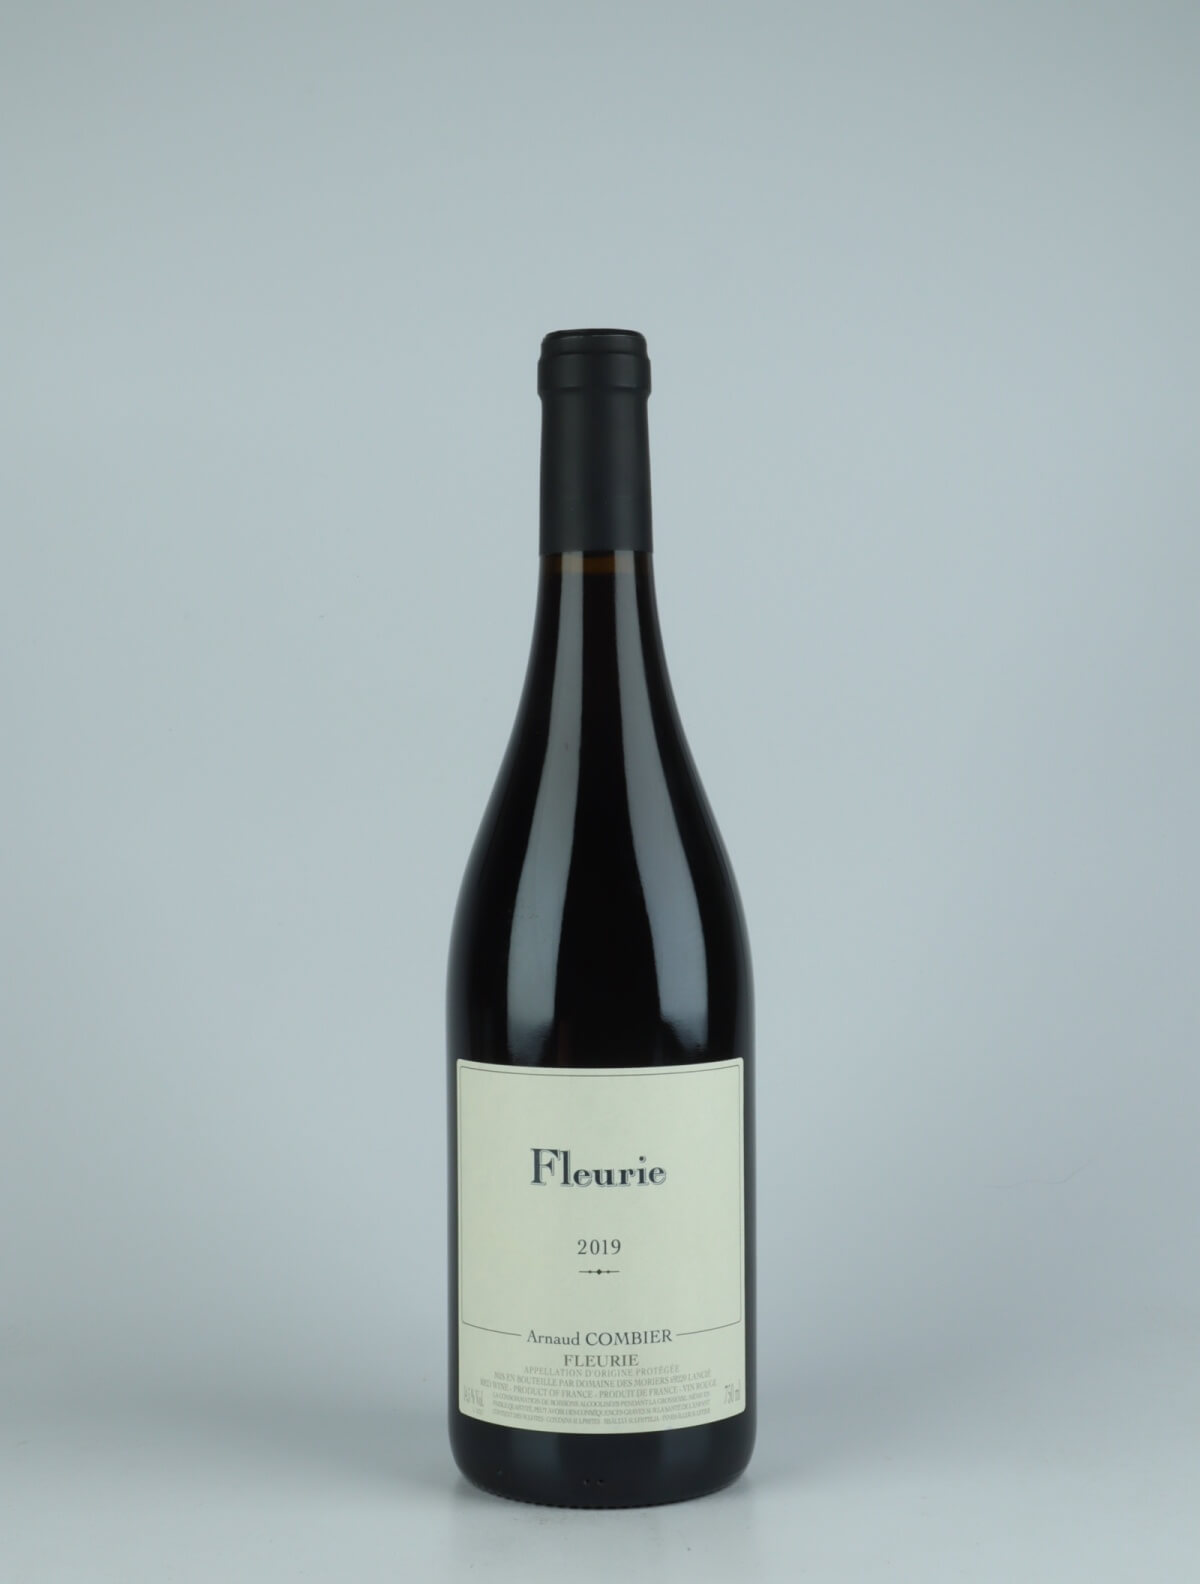 A bottle 2019 Fleurie Red wine from Arnaud Combier, Beaujolais in France